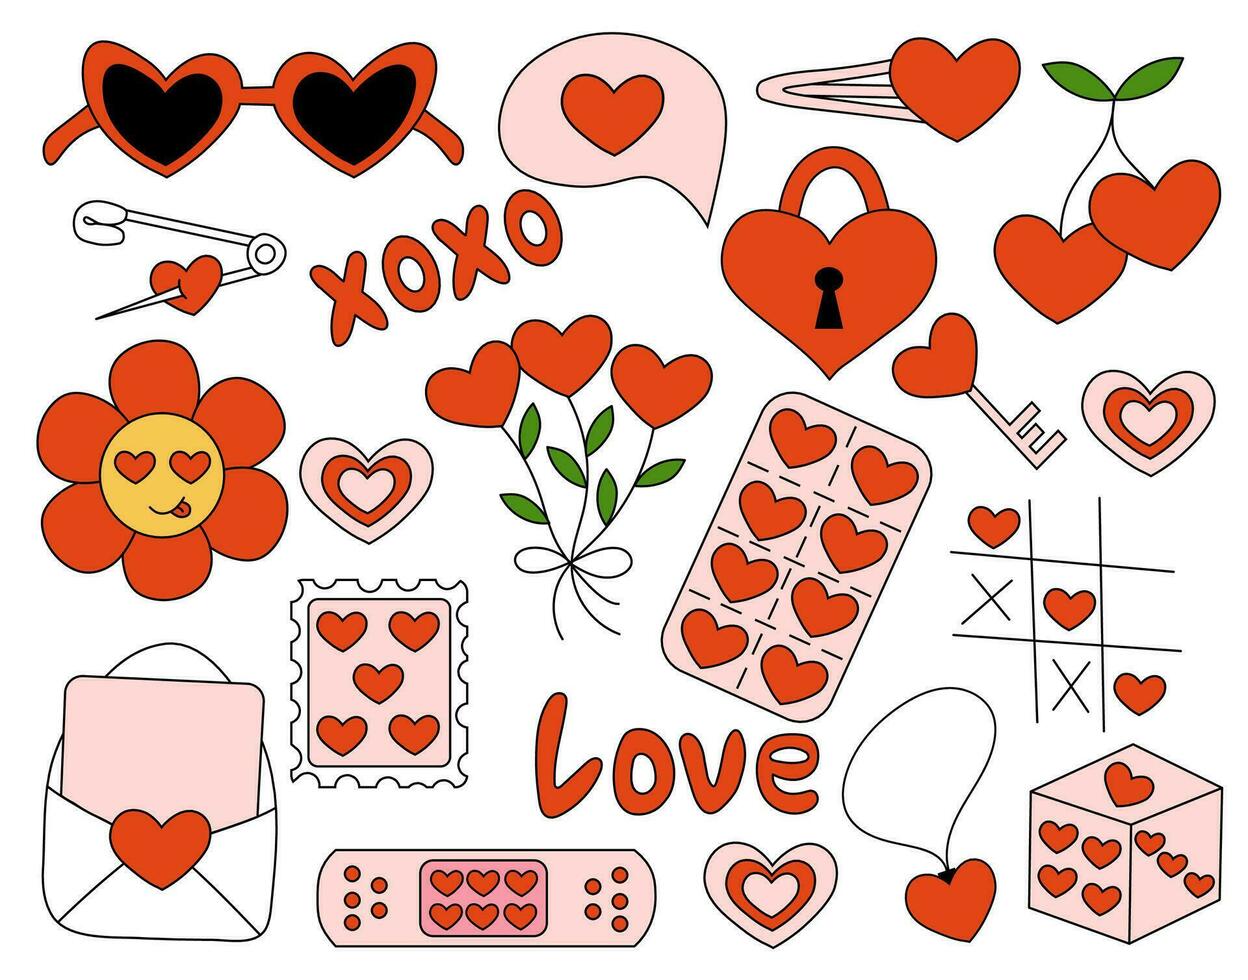 Valentine Day elements. Envelope, Cherry, Patch, Sunglasses, Hairpin, Flowers, Post Stamp Lock and key, Dice, Tic-tac-toe game. Vector flat illustration. Icons, stickers in Y2K style.